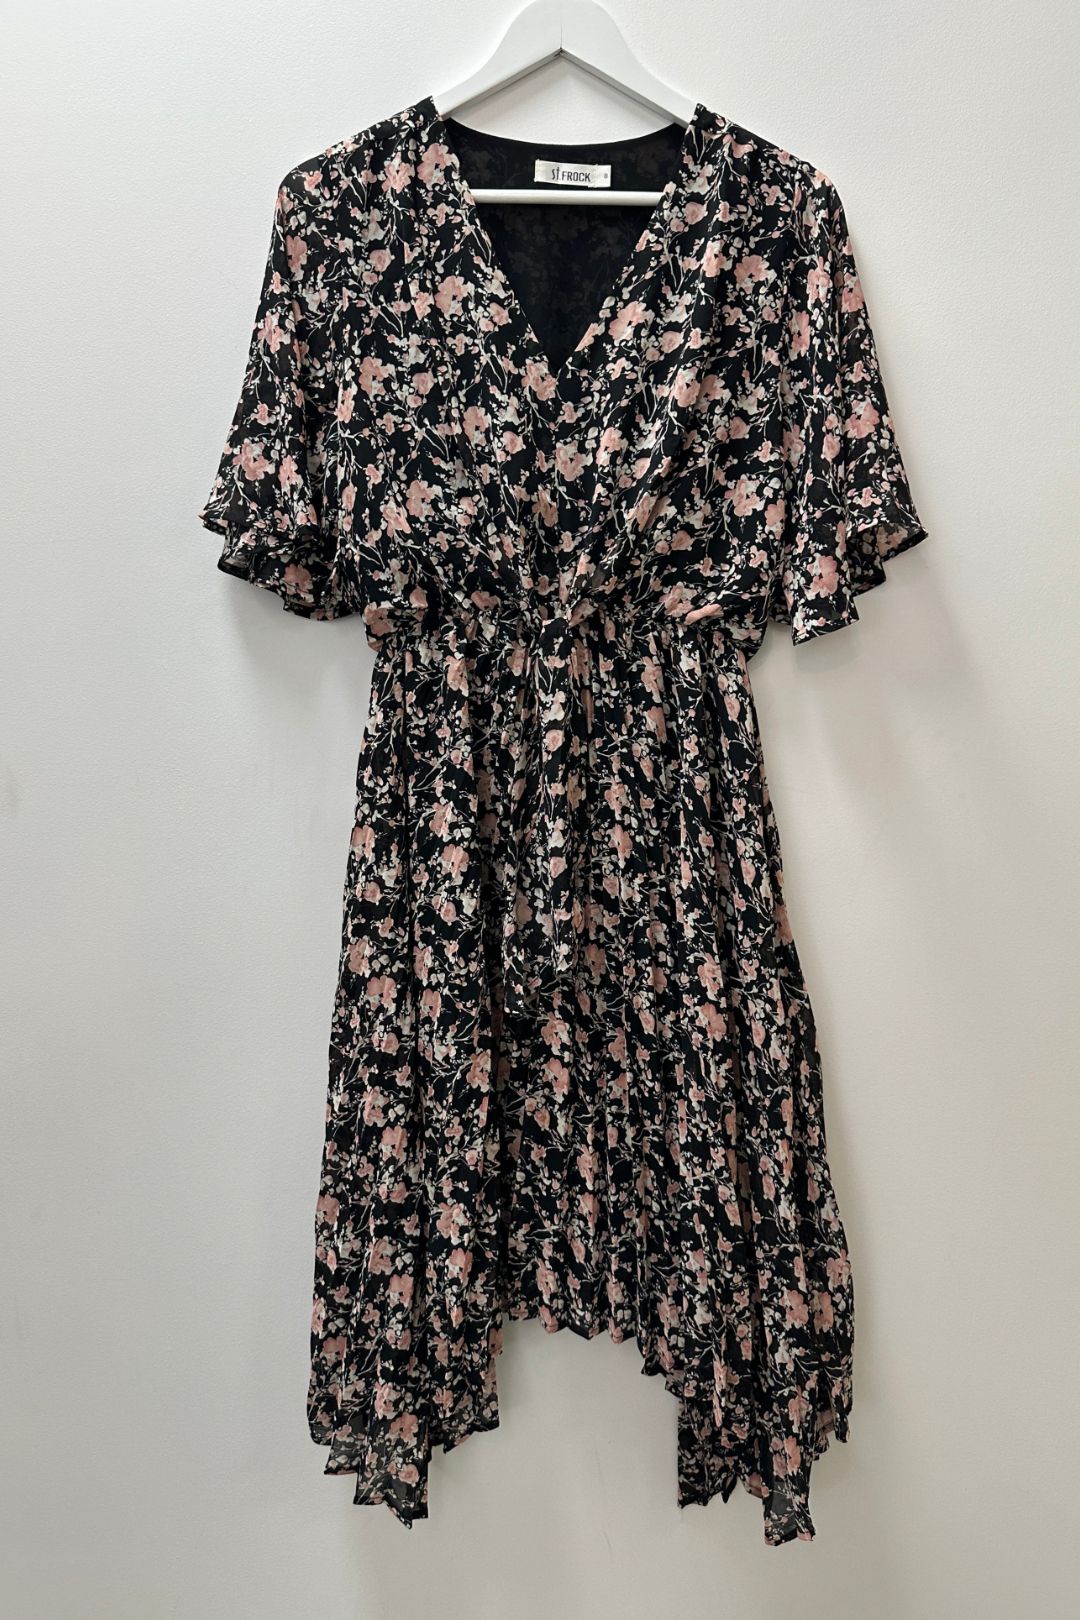 St Frock Midi Floral Dress in Black and Pink